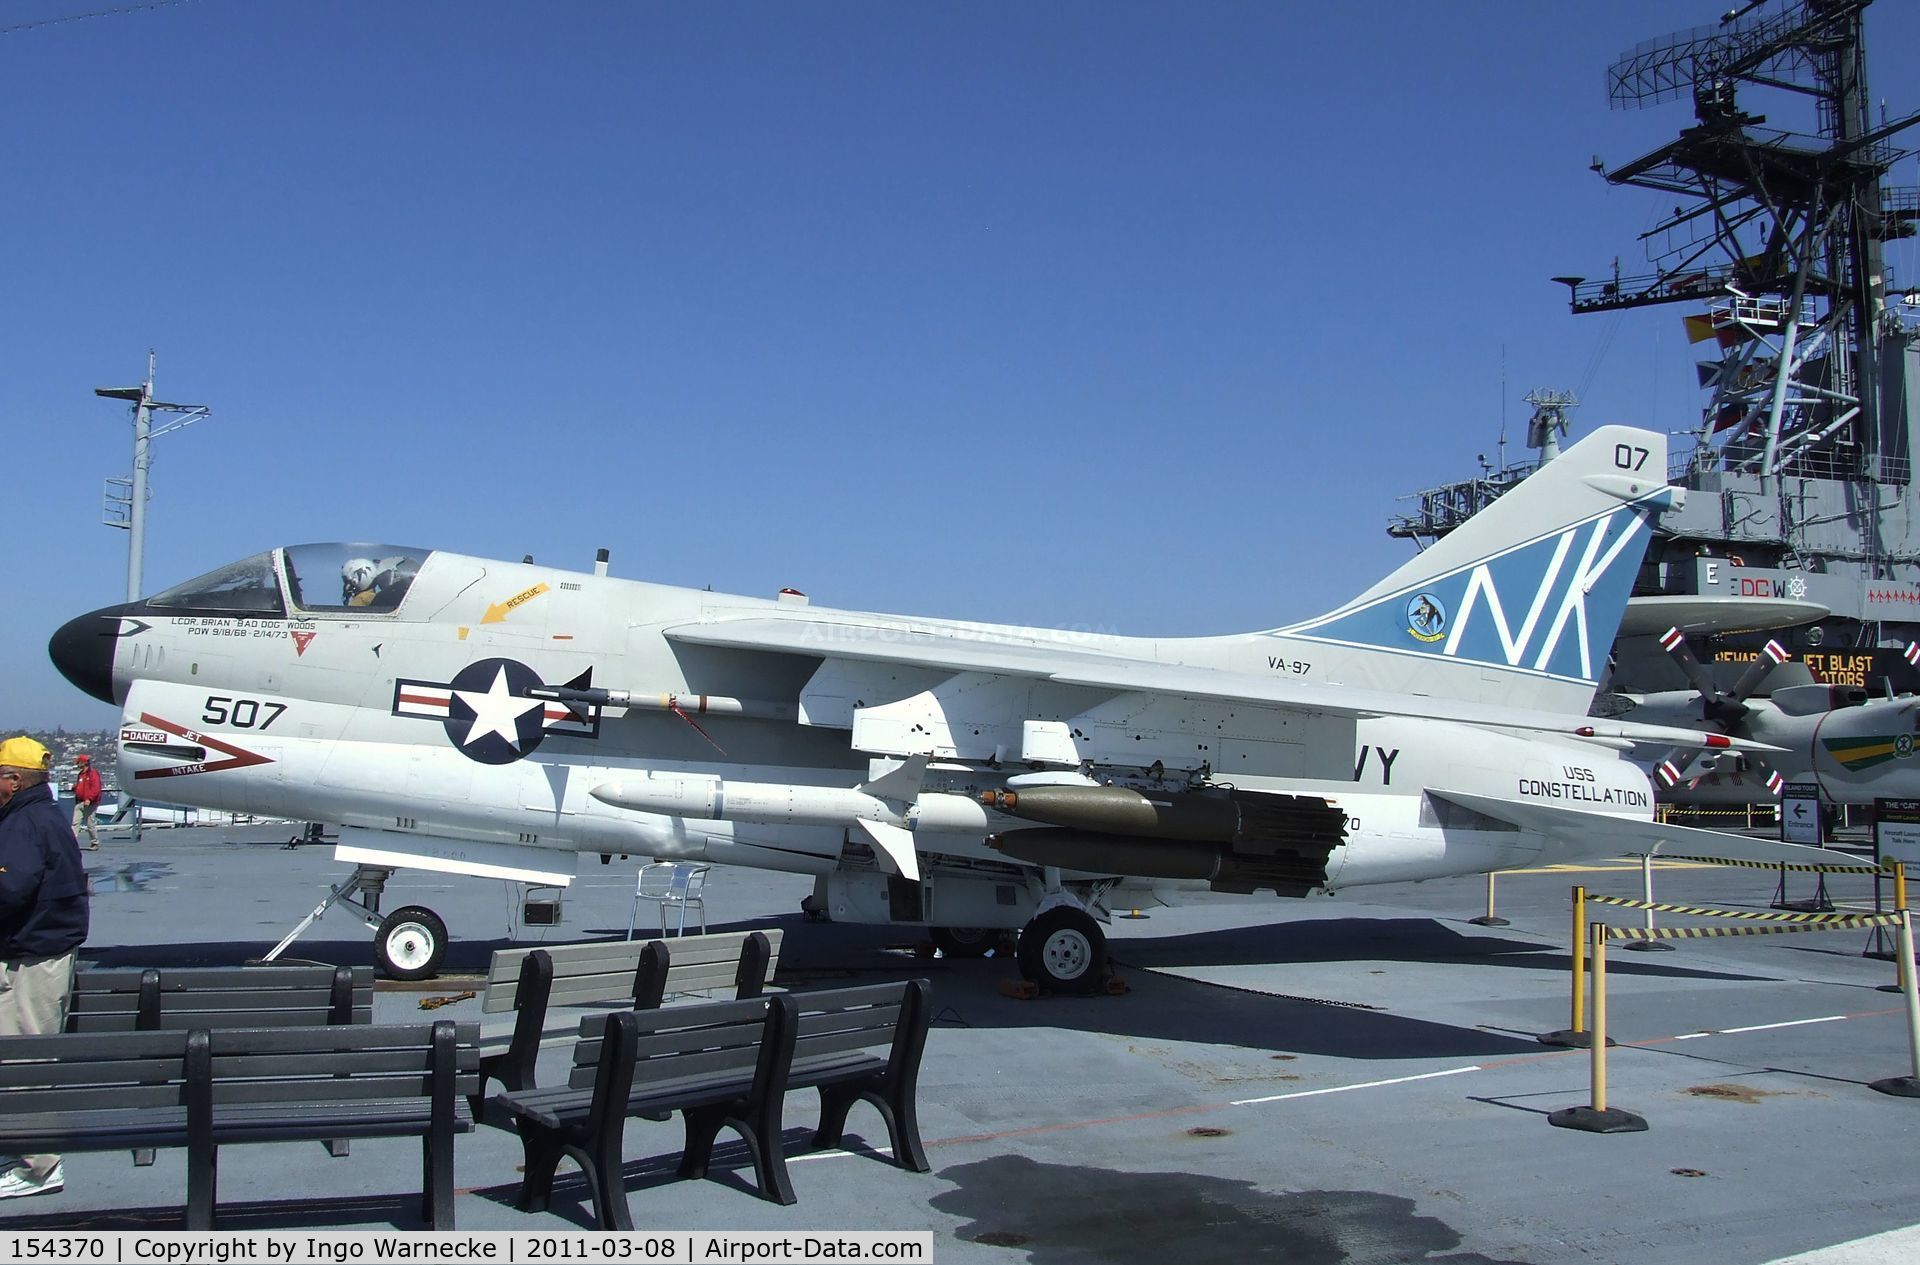 154370, LTV A-7B Corsair II C/N B-010, LTV A-7B Corsair II on the flight deck of the USS Midway Museum, San Diego CA